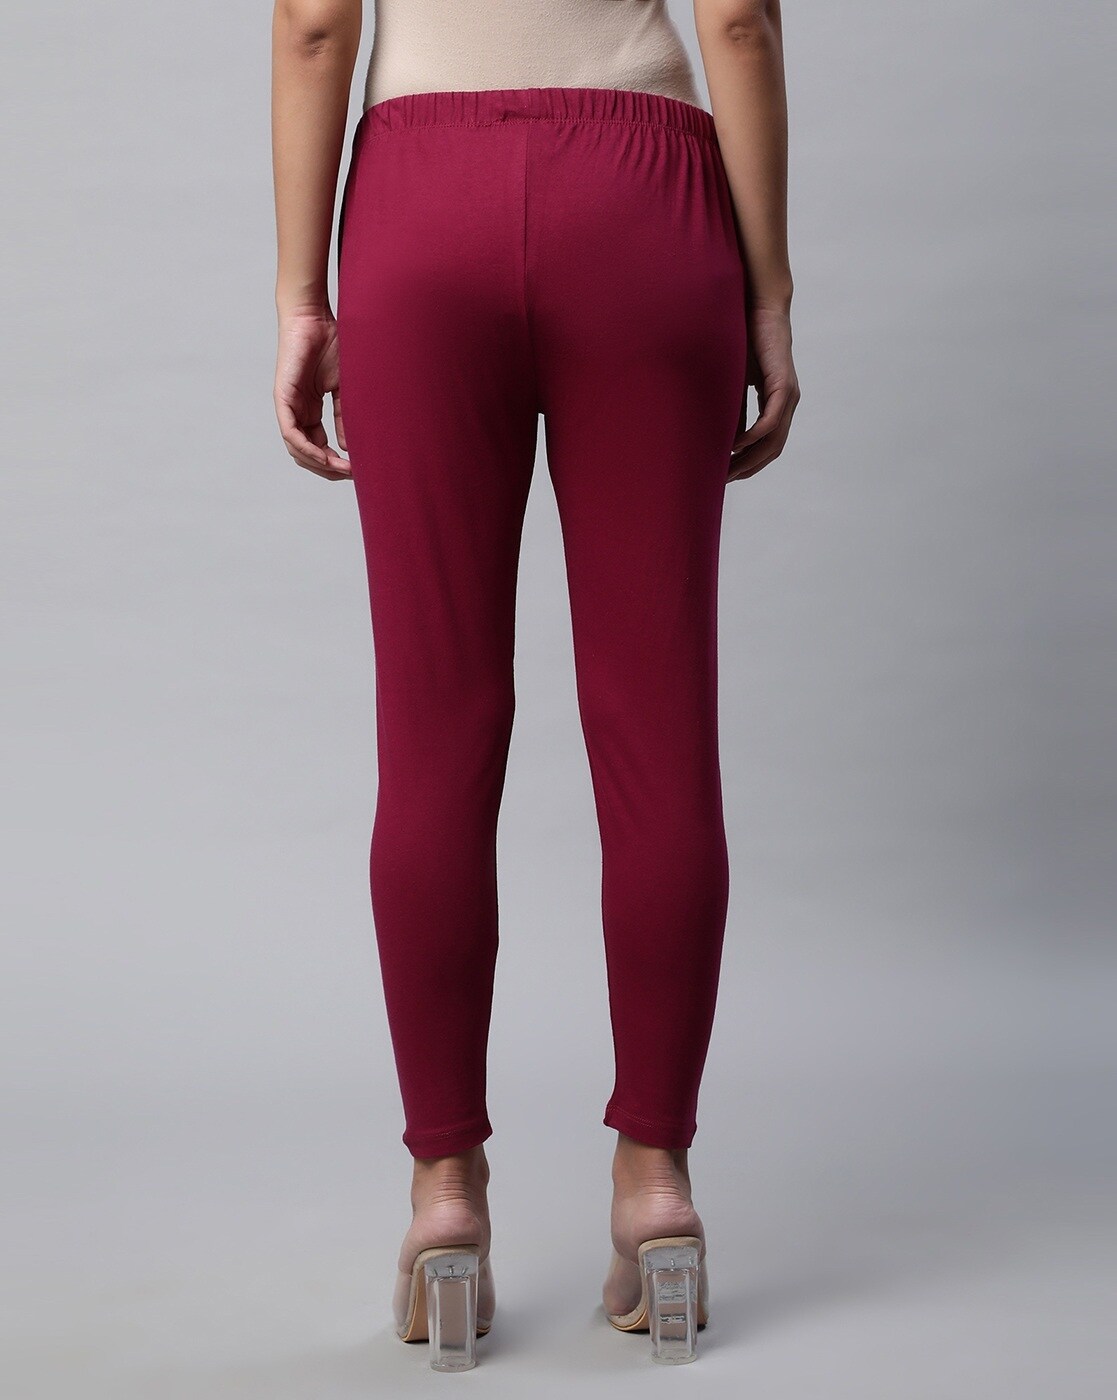 Avaasa Ankle Length Leggings in Rampur - Dealers, Manufacturers & Suppliers  - Justdial